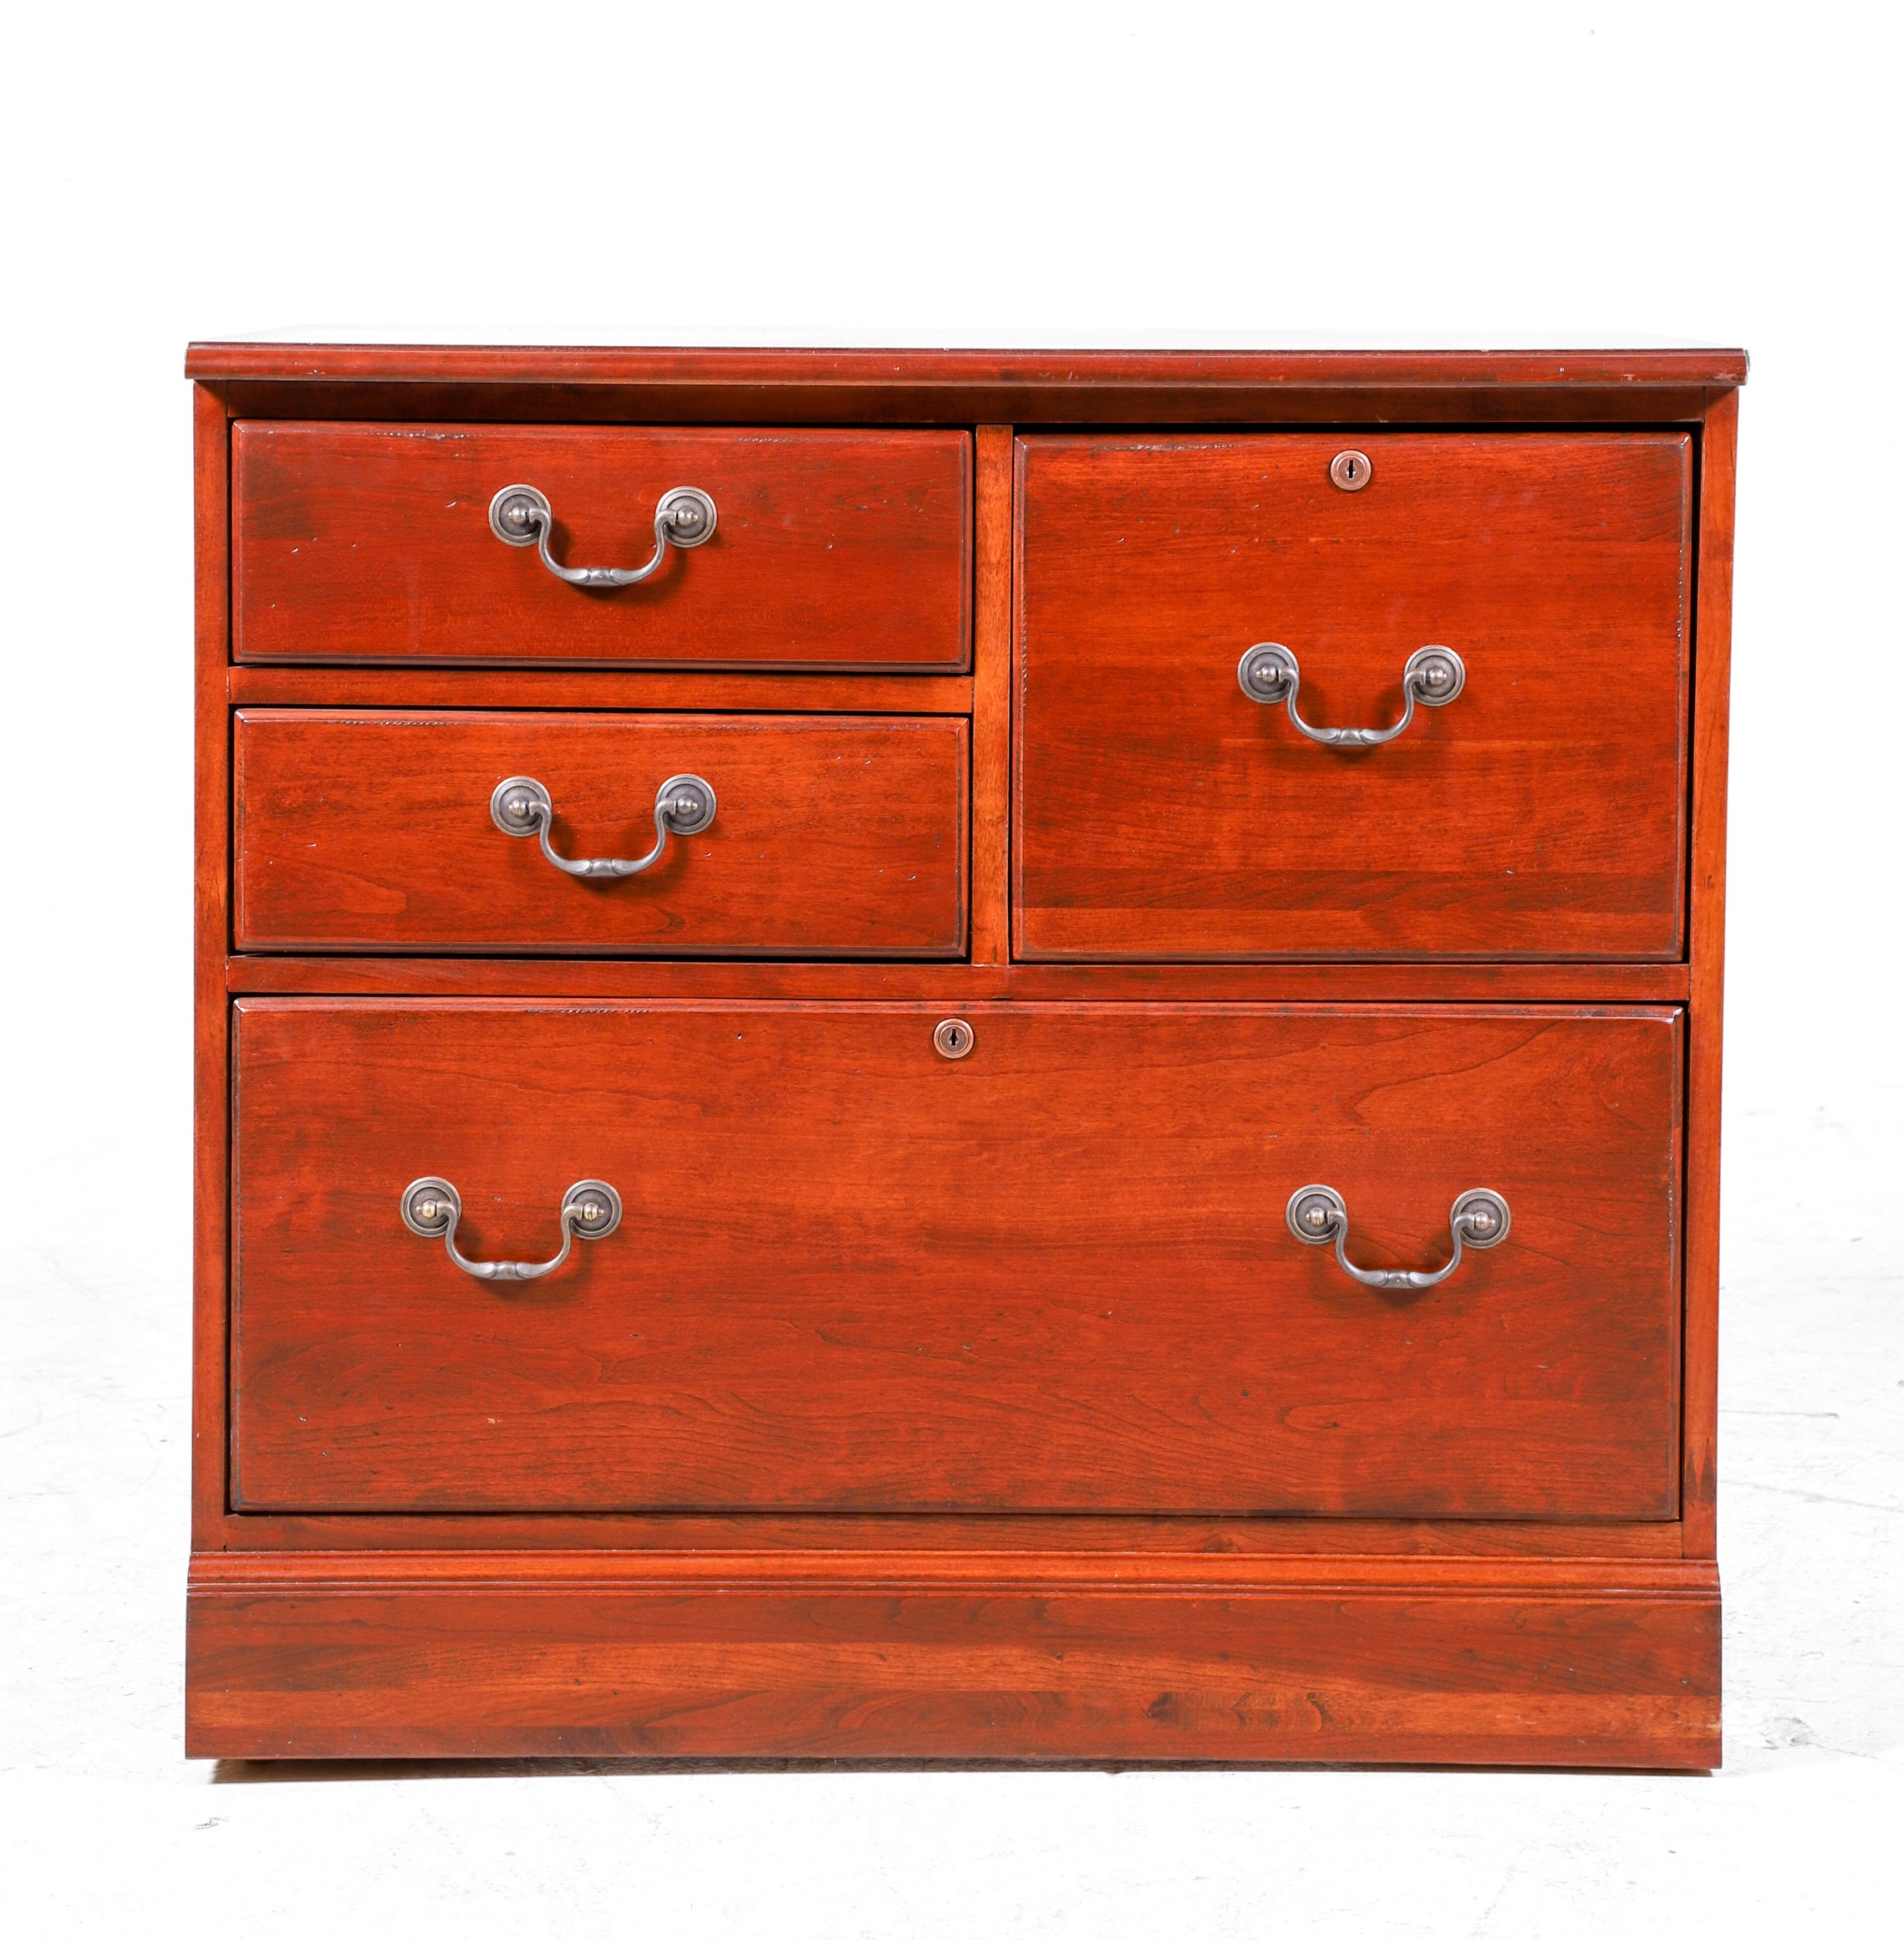 Lexington office cabinet, two drawers